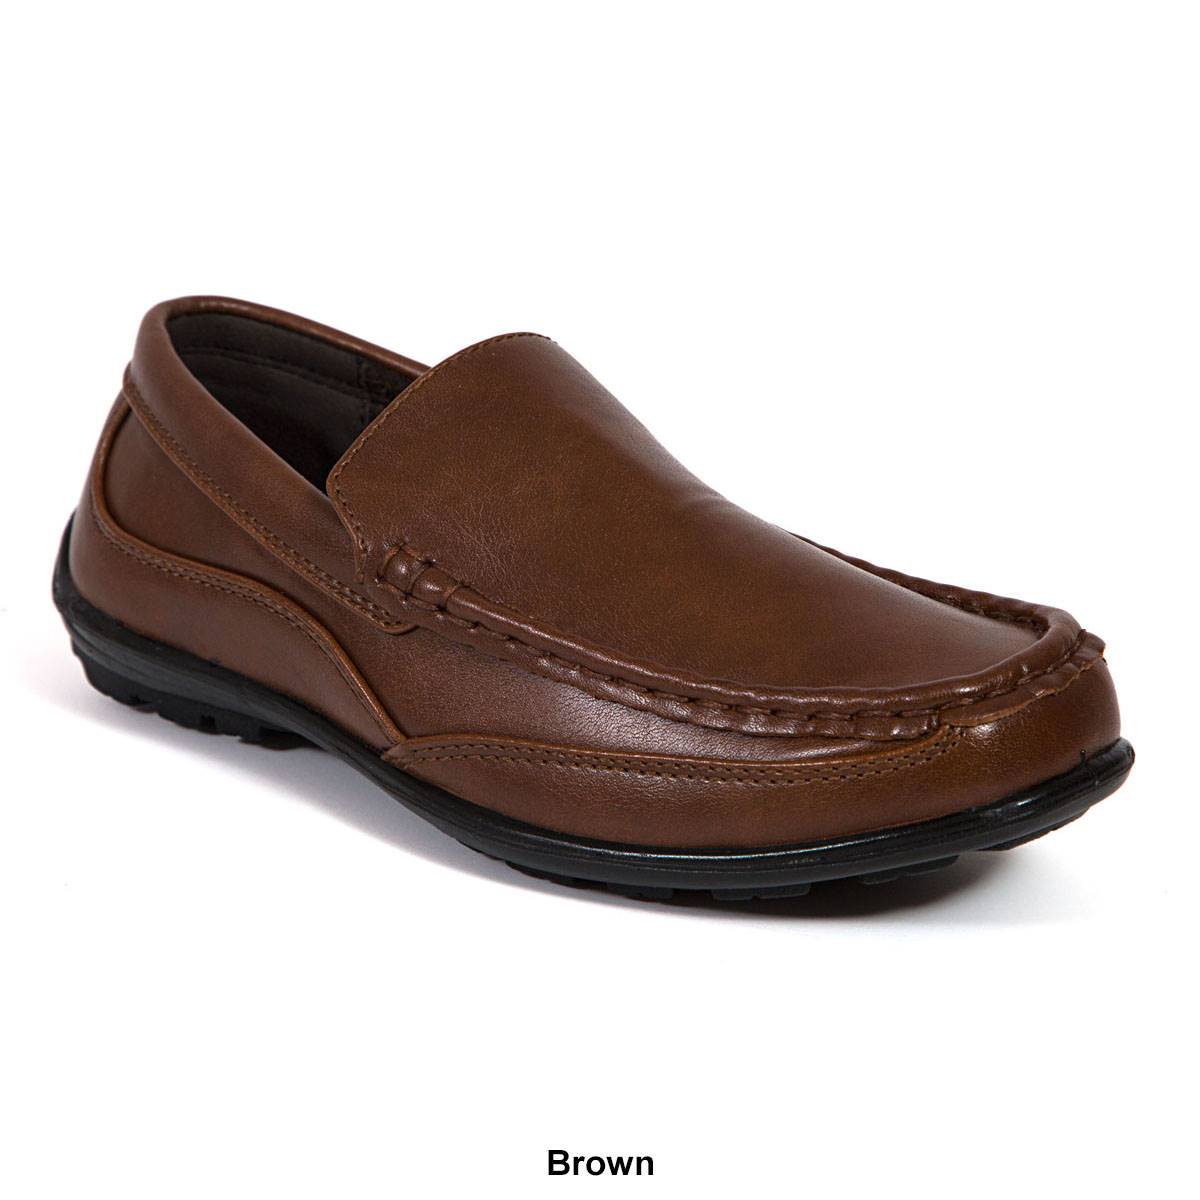 Big Boy Deer Stags(R) Booster Loafers